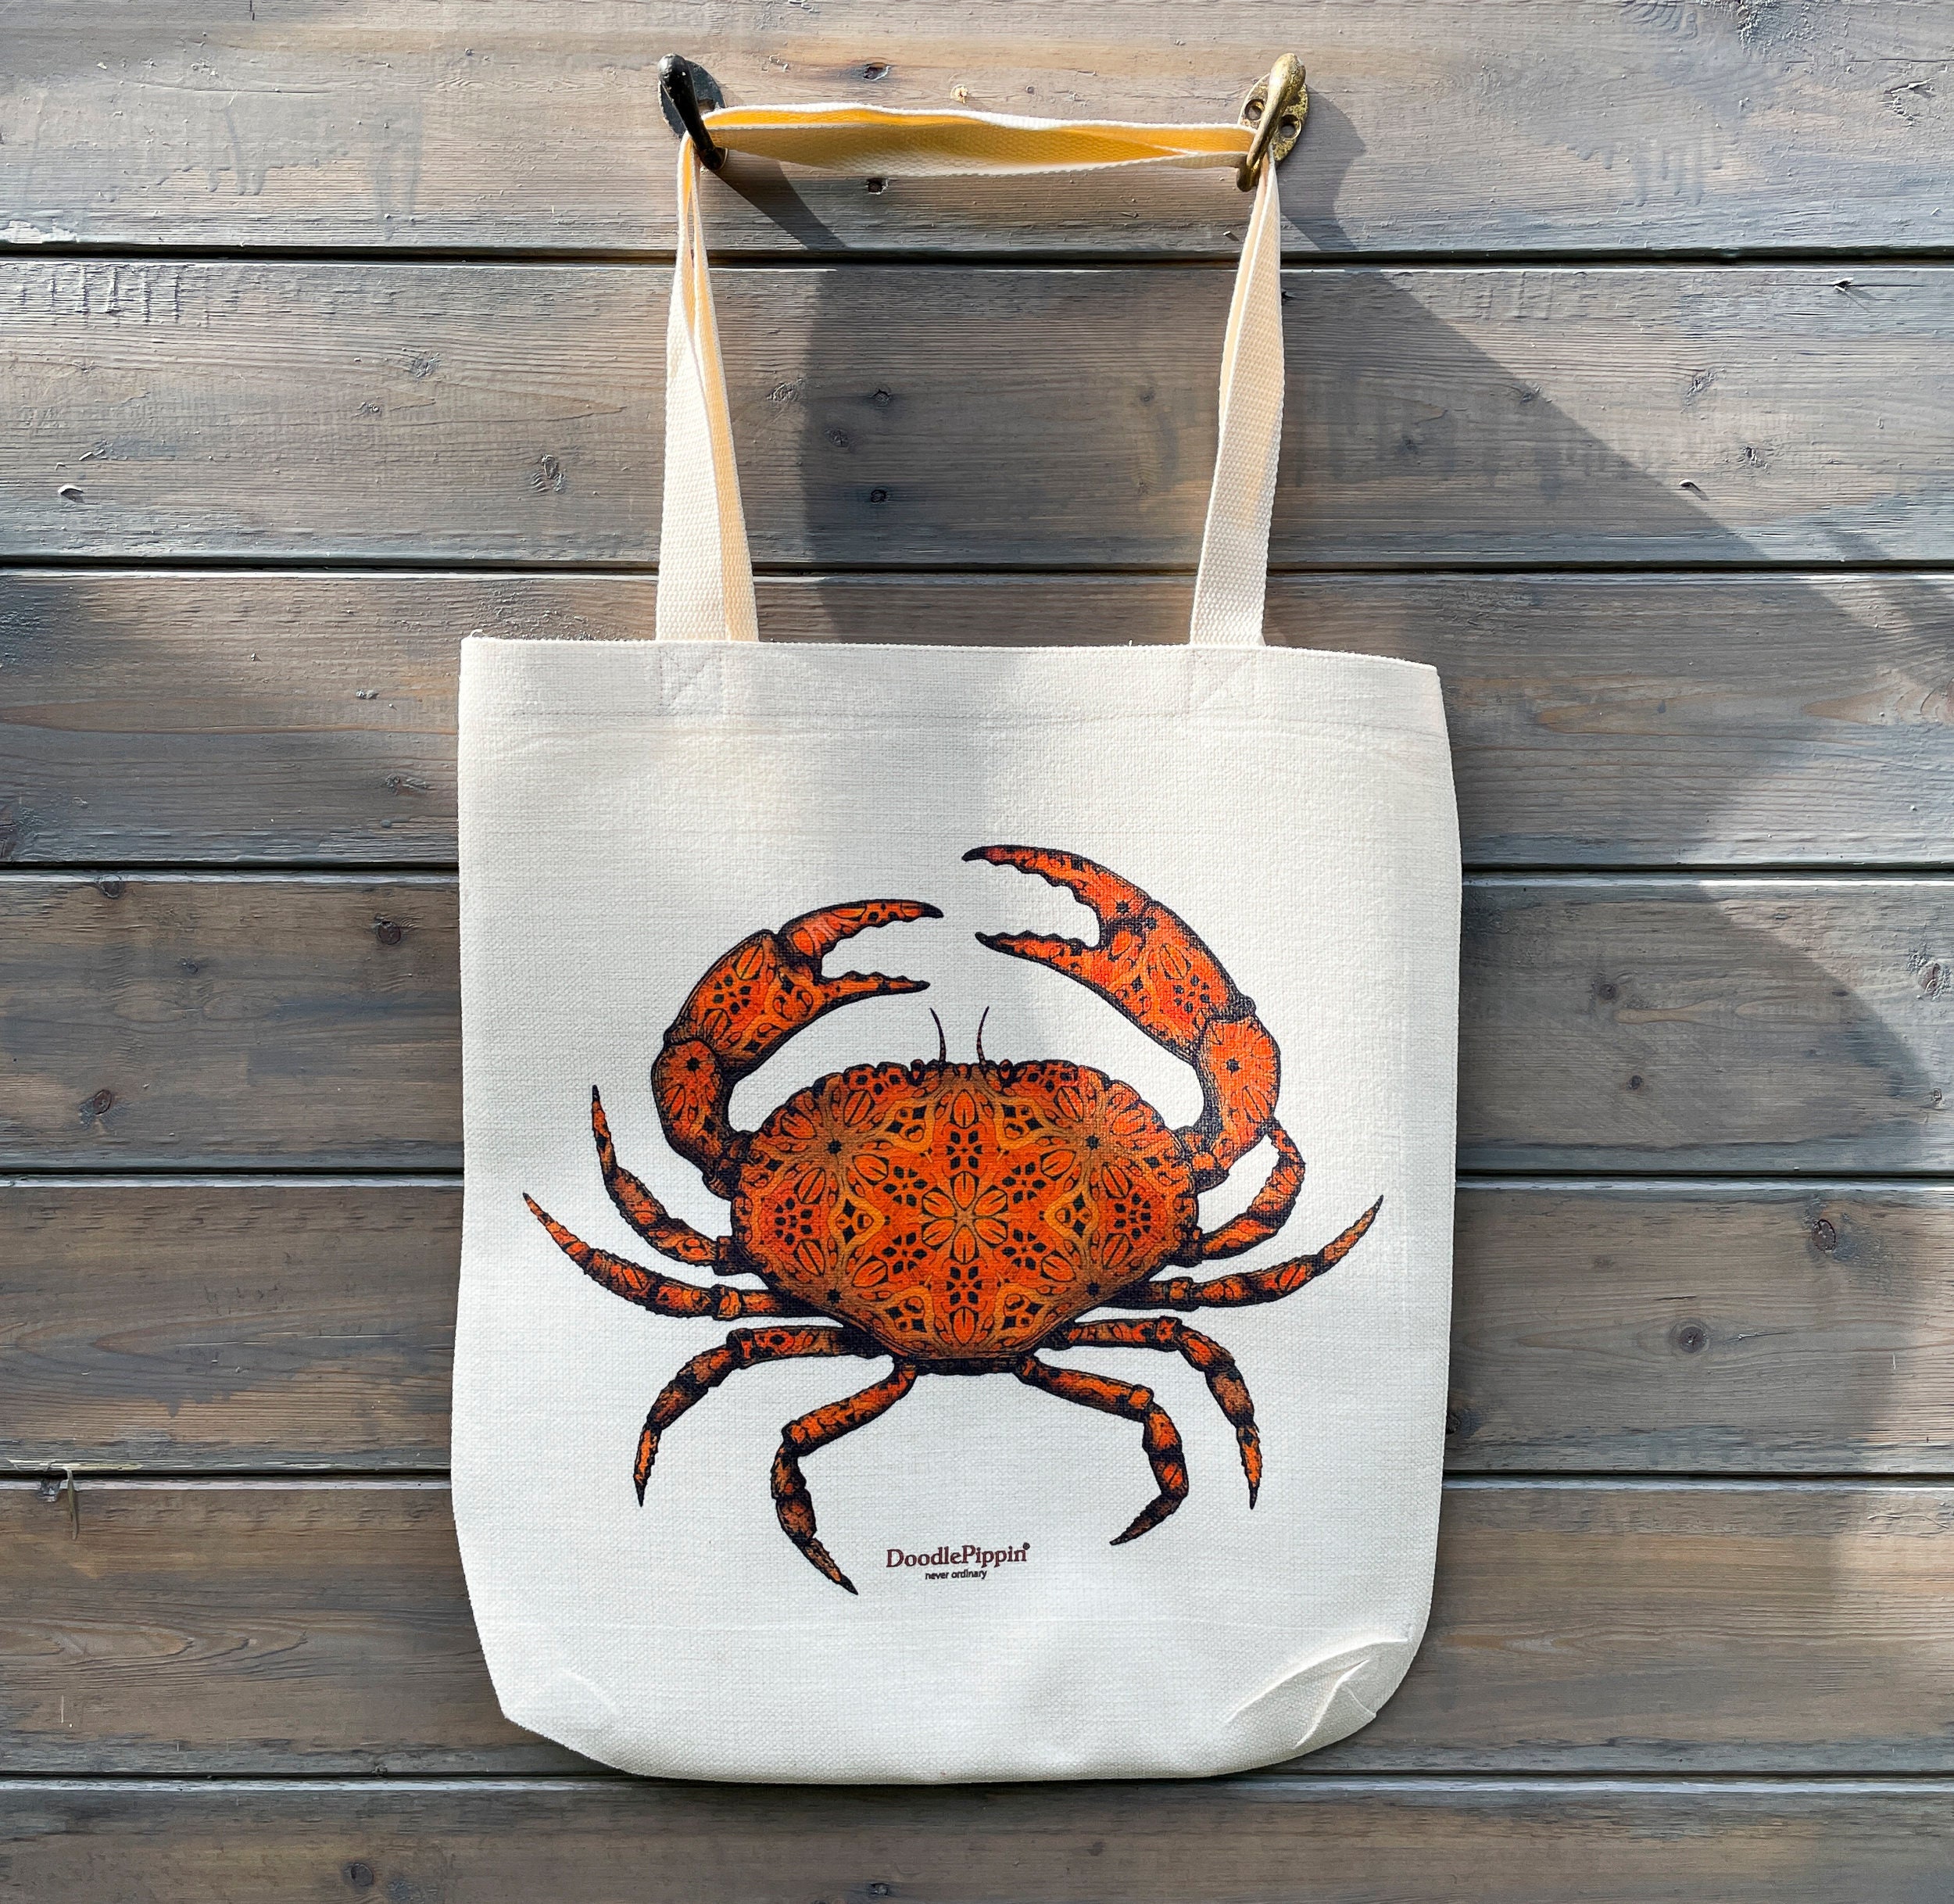 Shy violinist crab hiding in a shell Tote Bag by Julien Leroy - Pixels